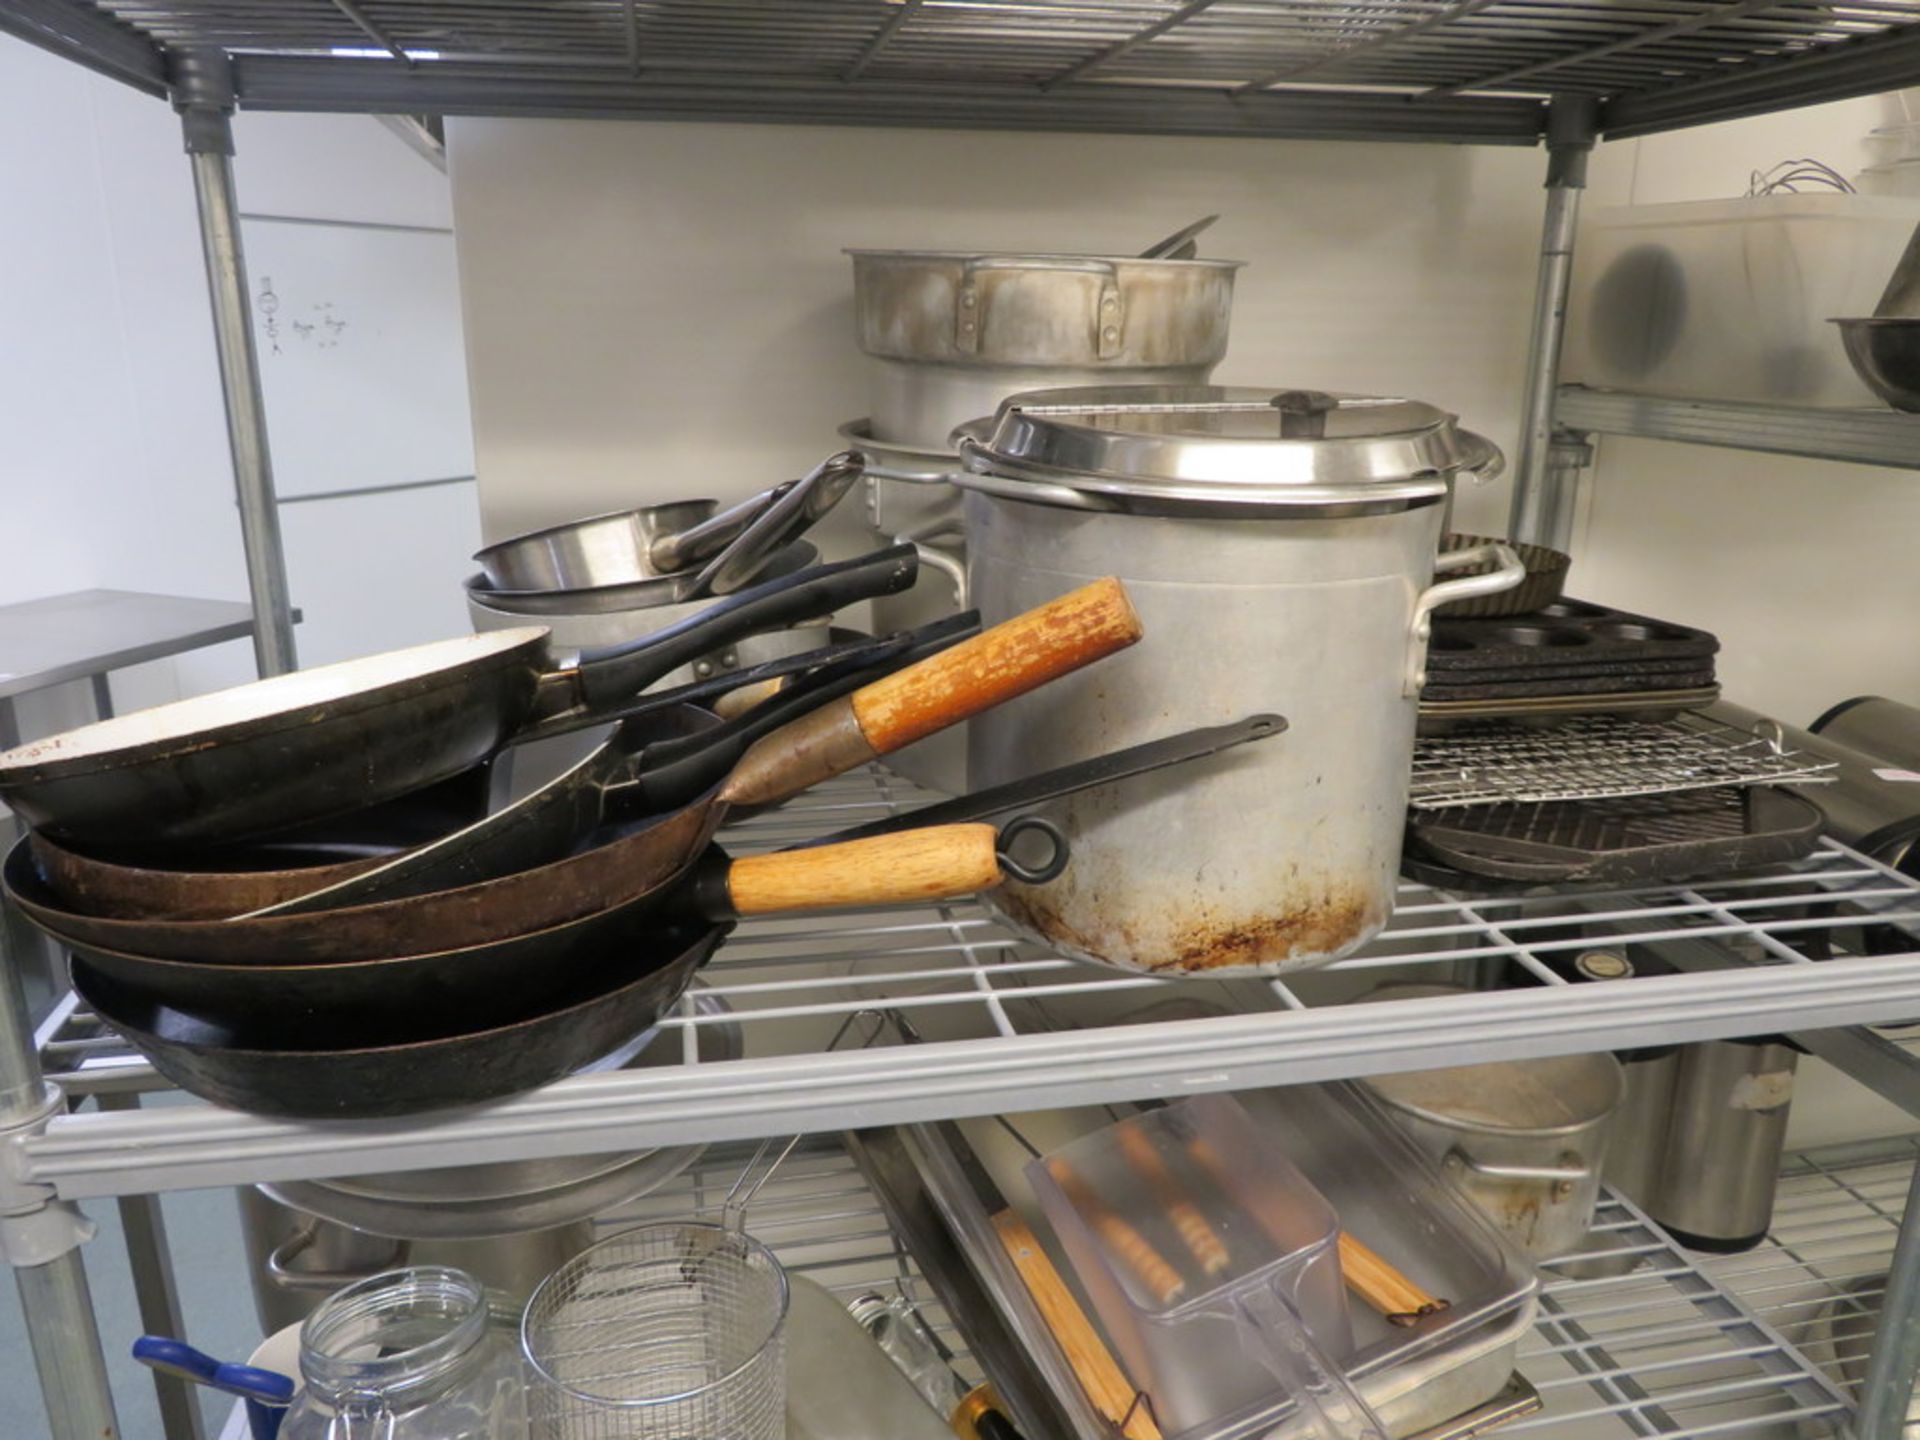 2 X KITCHEN STORAGE RACKS AND QTY OF ASSORTED KITCHEN PANS, UTENSILS ETC - Image 3 of 5